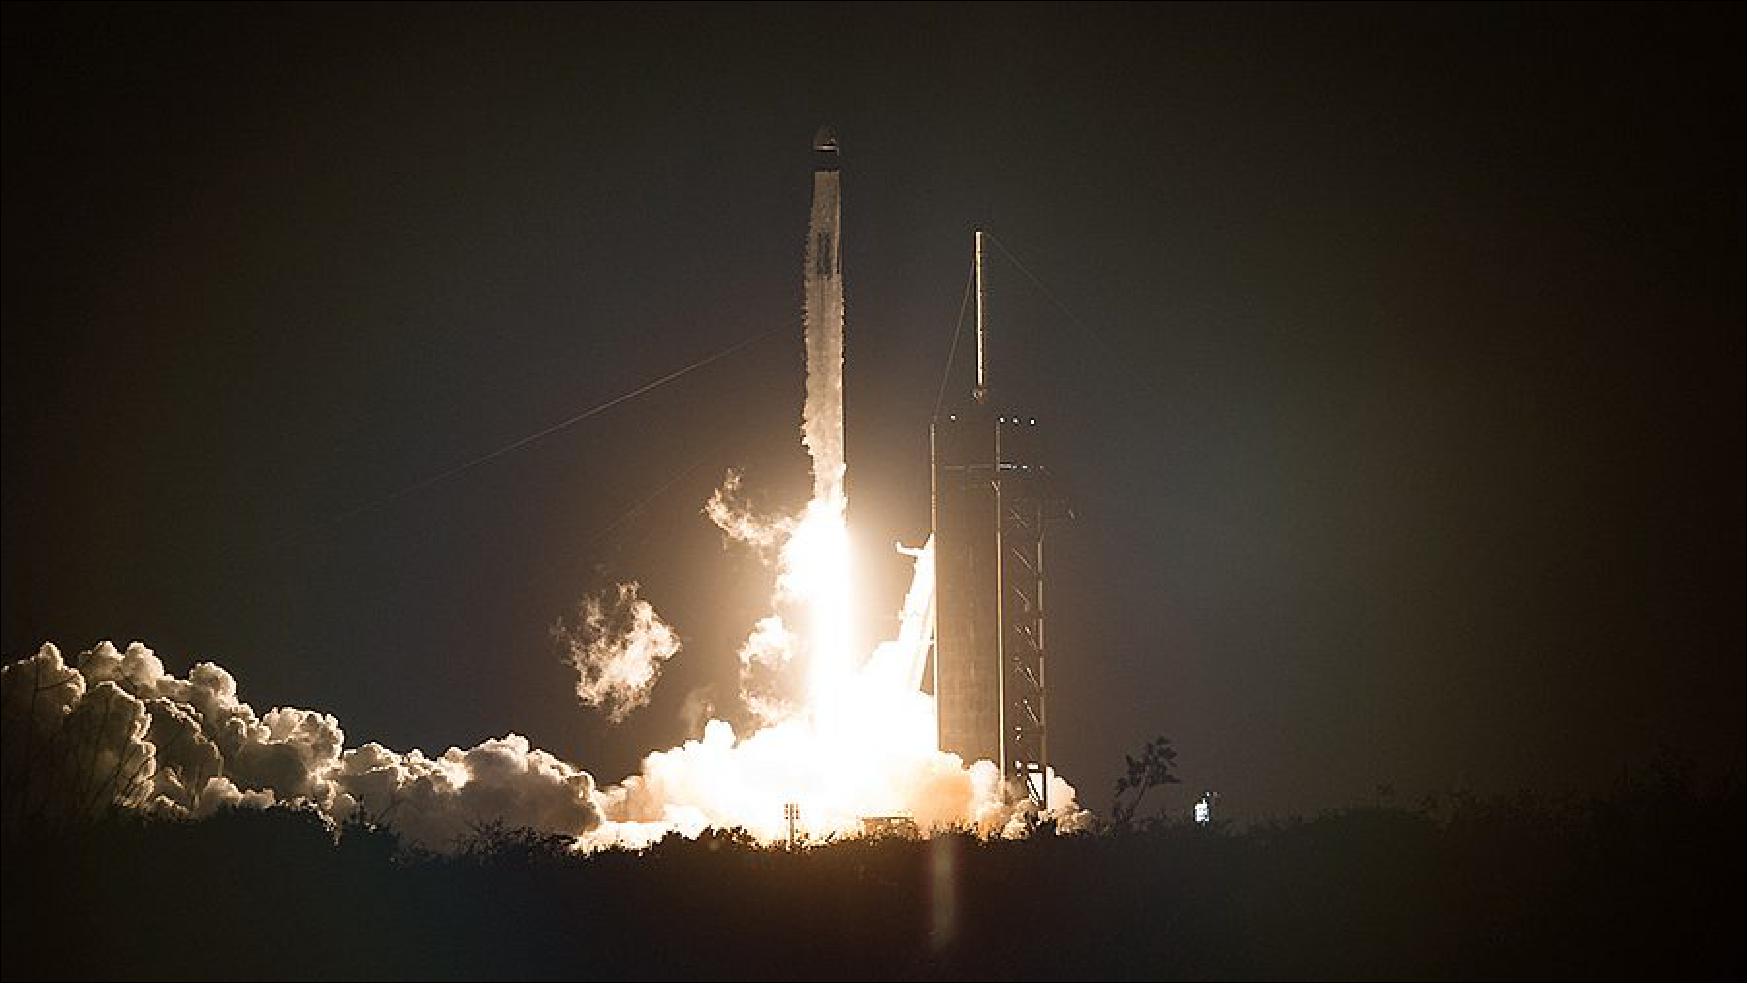 Figure 7: The SpaceX Falcon 9 rocket lifts off with four Commercial Crew astronauts inside the Crew Dragon vehicle from Kennedy Space Center in Florida (image credit: NASA)